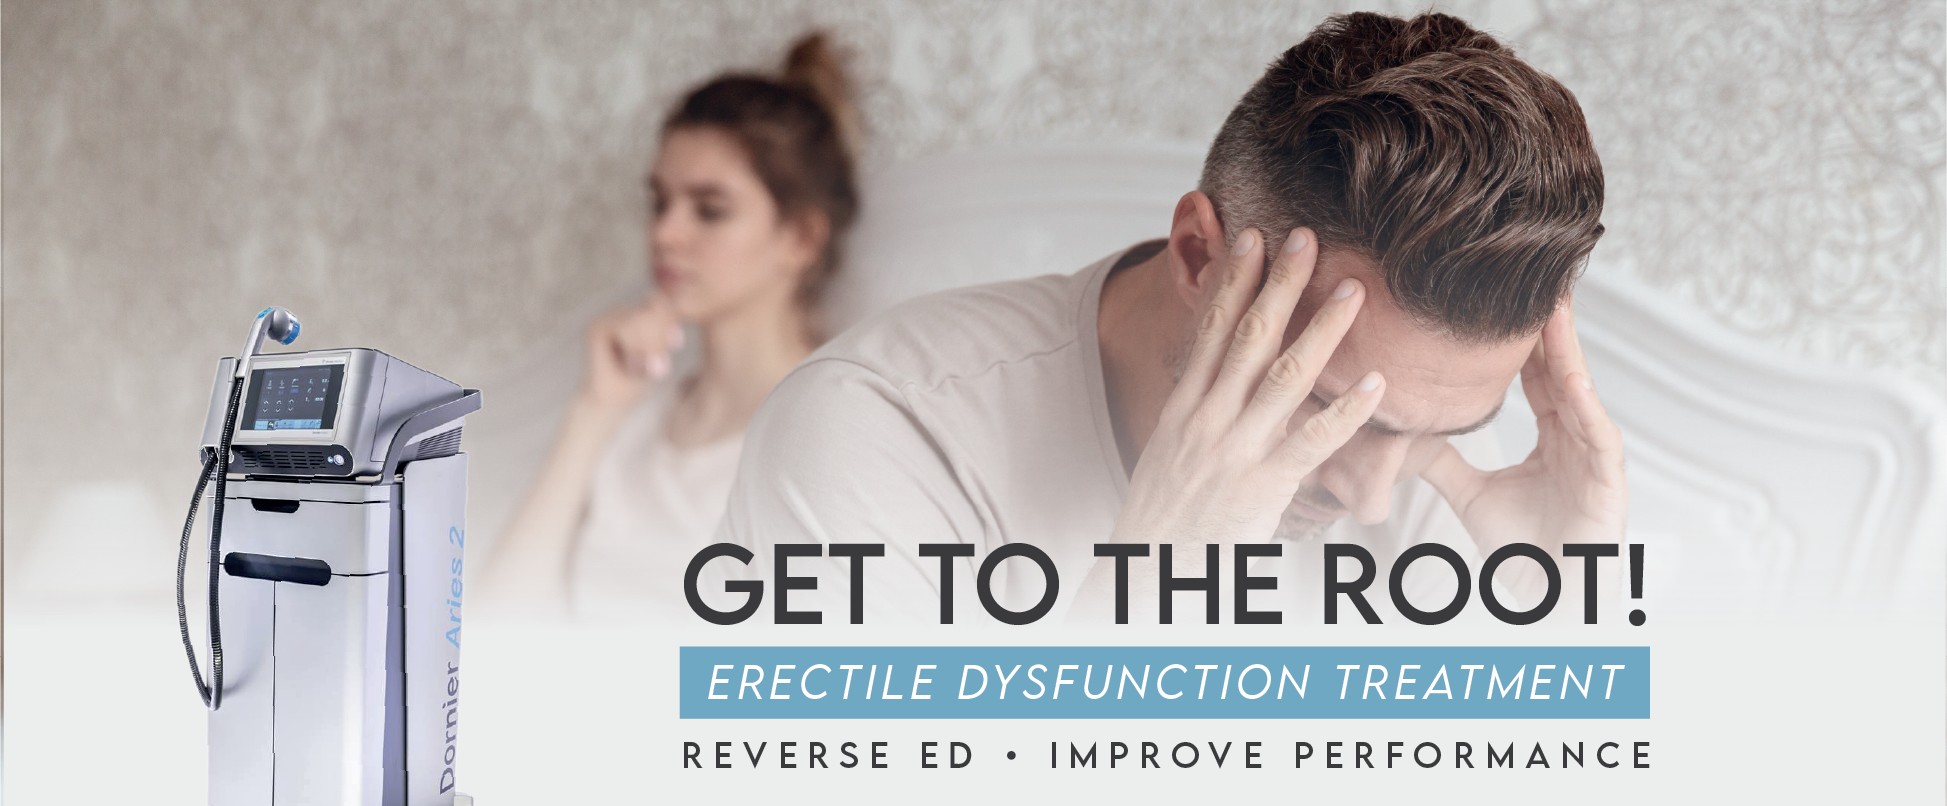 Get to the root for Erectile Dysfunction treatment